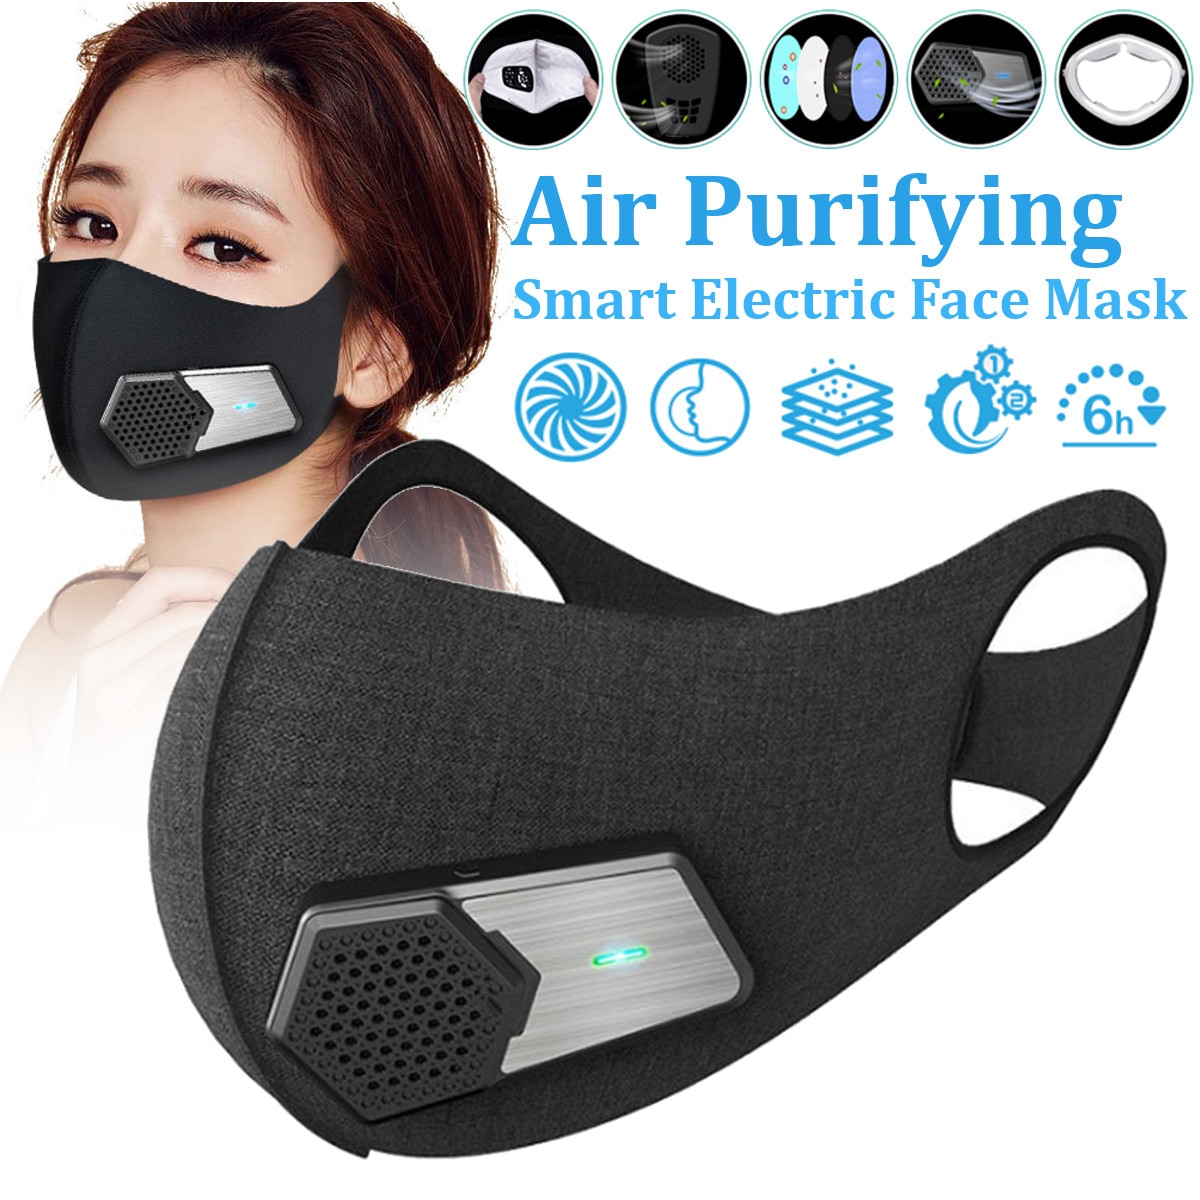 Download Smart Electric Face Mask Air Purifying N95 Anti-Pollution ...